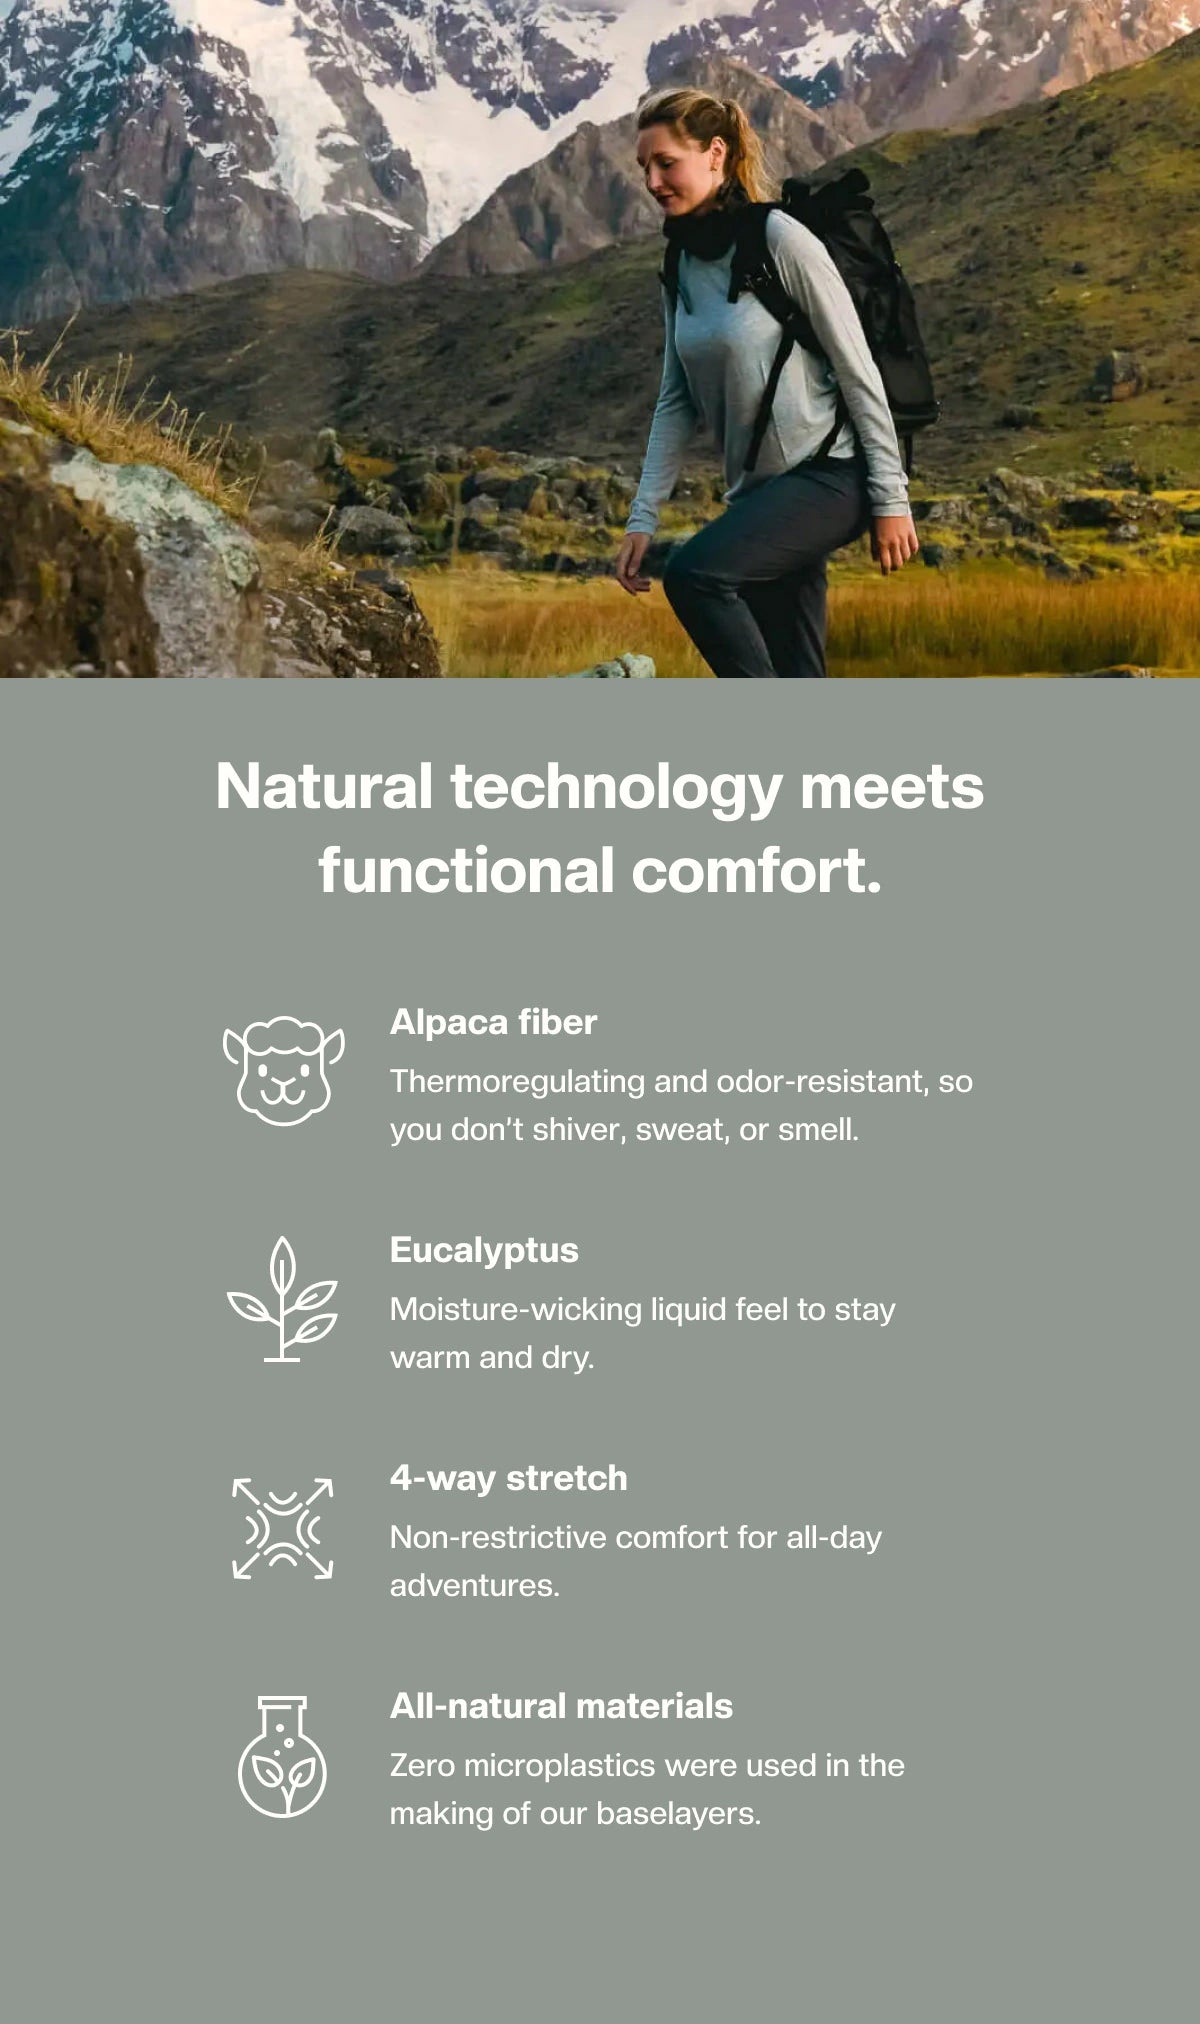 Natural technology functional comfort. Alpaca fiber: Thermoregulating and odor-resistant, so you don't shiver, sweat or smell. Eucalyptus: Moisture-wicking liquid feel to stay warm and dry. 4-way stretch: Non-restrictive comfort for all-day adventures. All-natural materials: Zero microplastics were used in the making of our baselayers